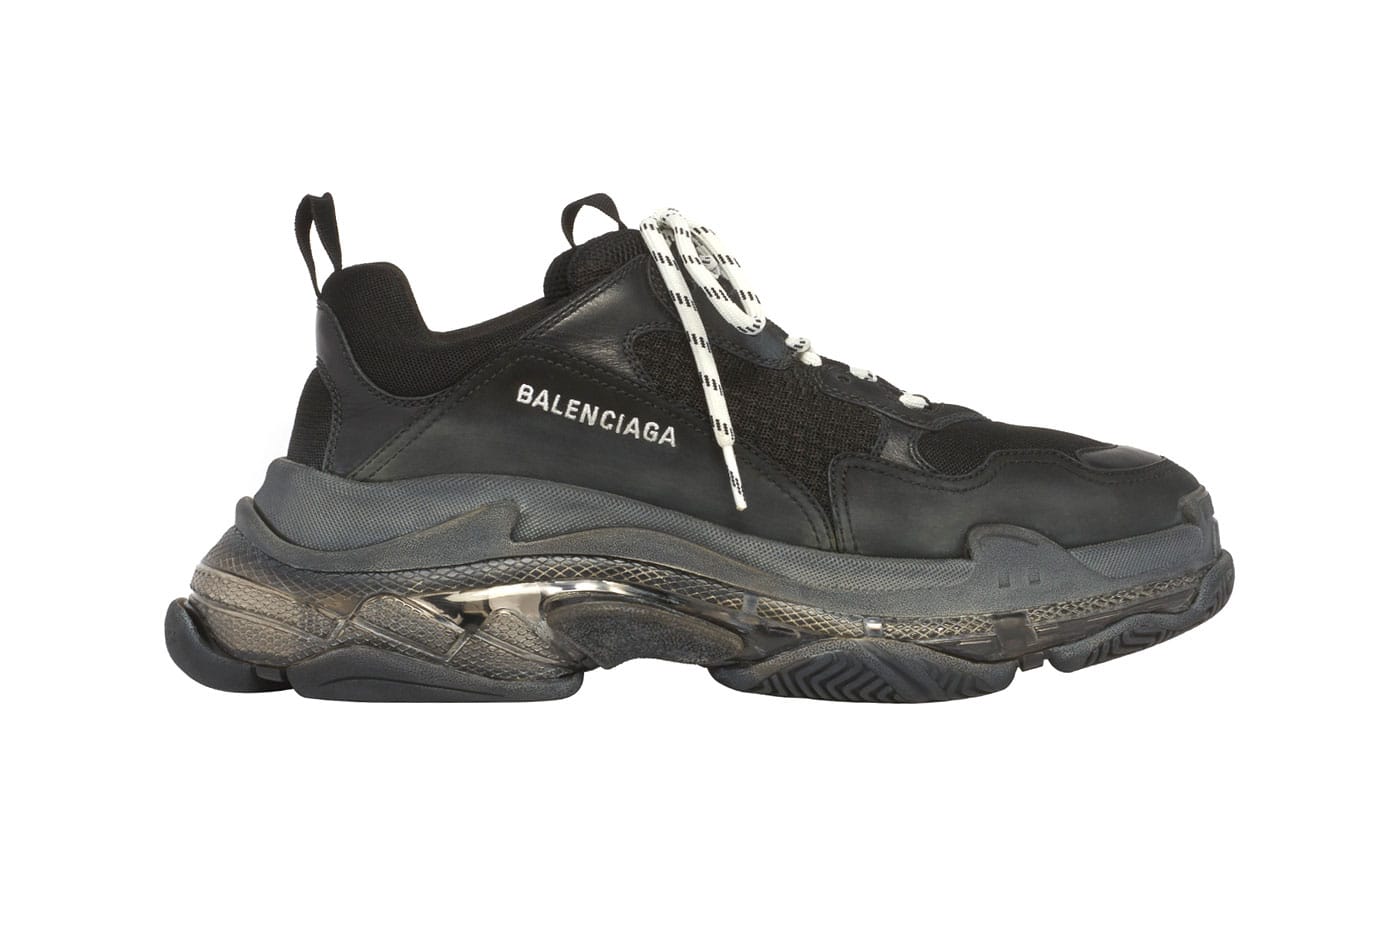 Balenciaga speed trainer triple black outfit Luoburdedes Foundation